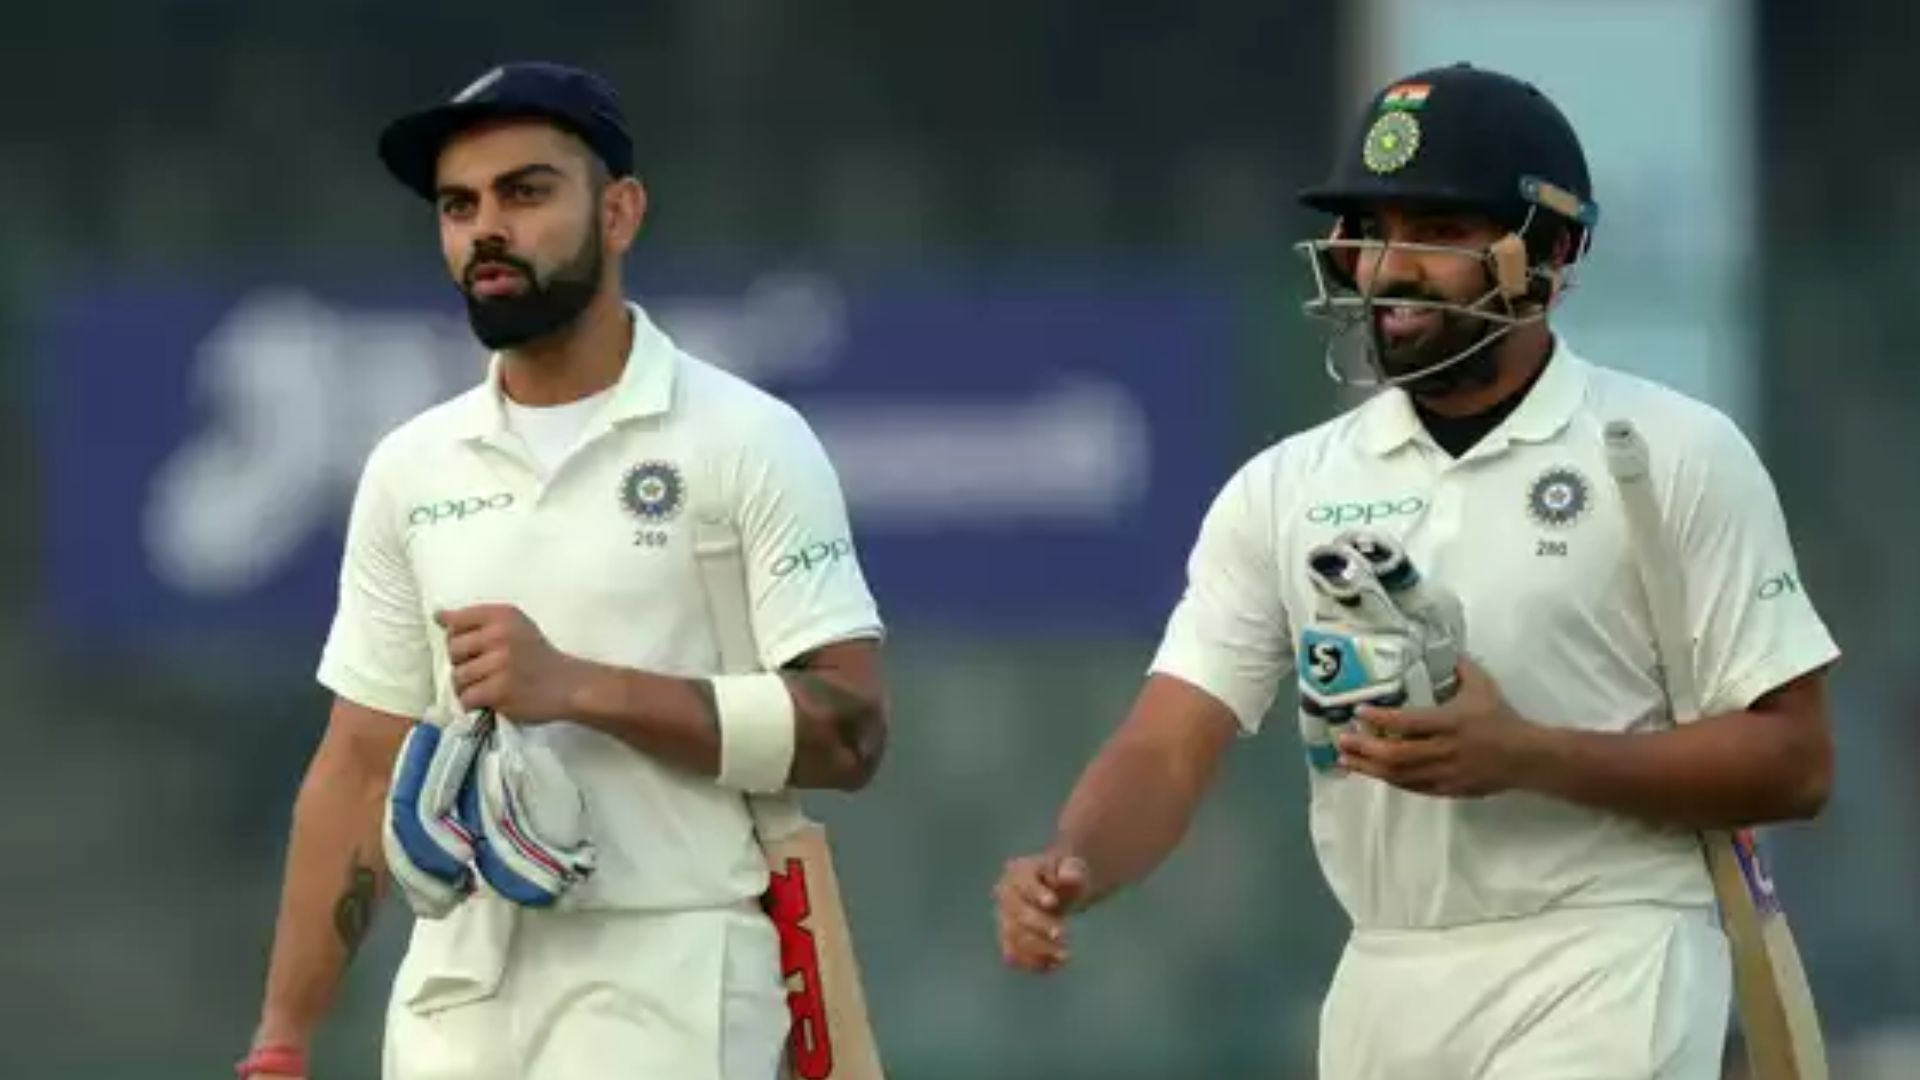 Rohit Sharma and Virat Kohli have been the pillars of Indian cricket across formats. (Pic: BCCI)